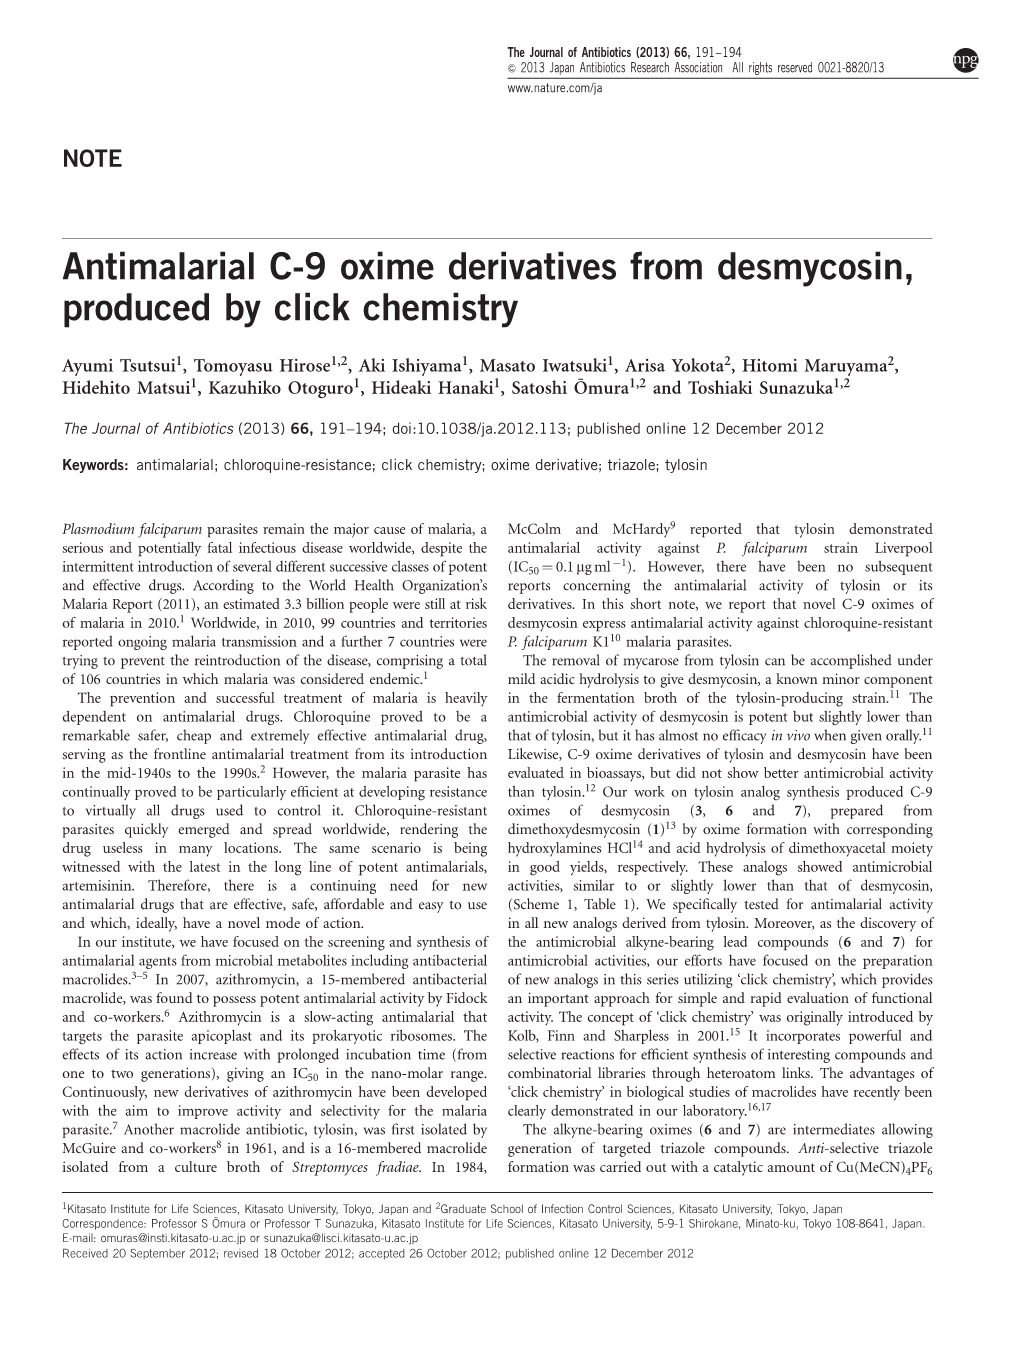 Antimalarial C-9 Oxime Derivatives from Desmycosin, Produced by Click Chemistry